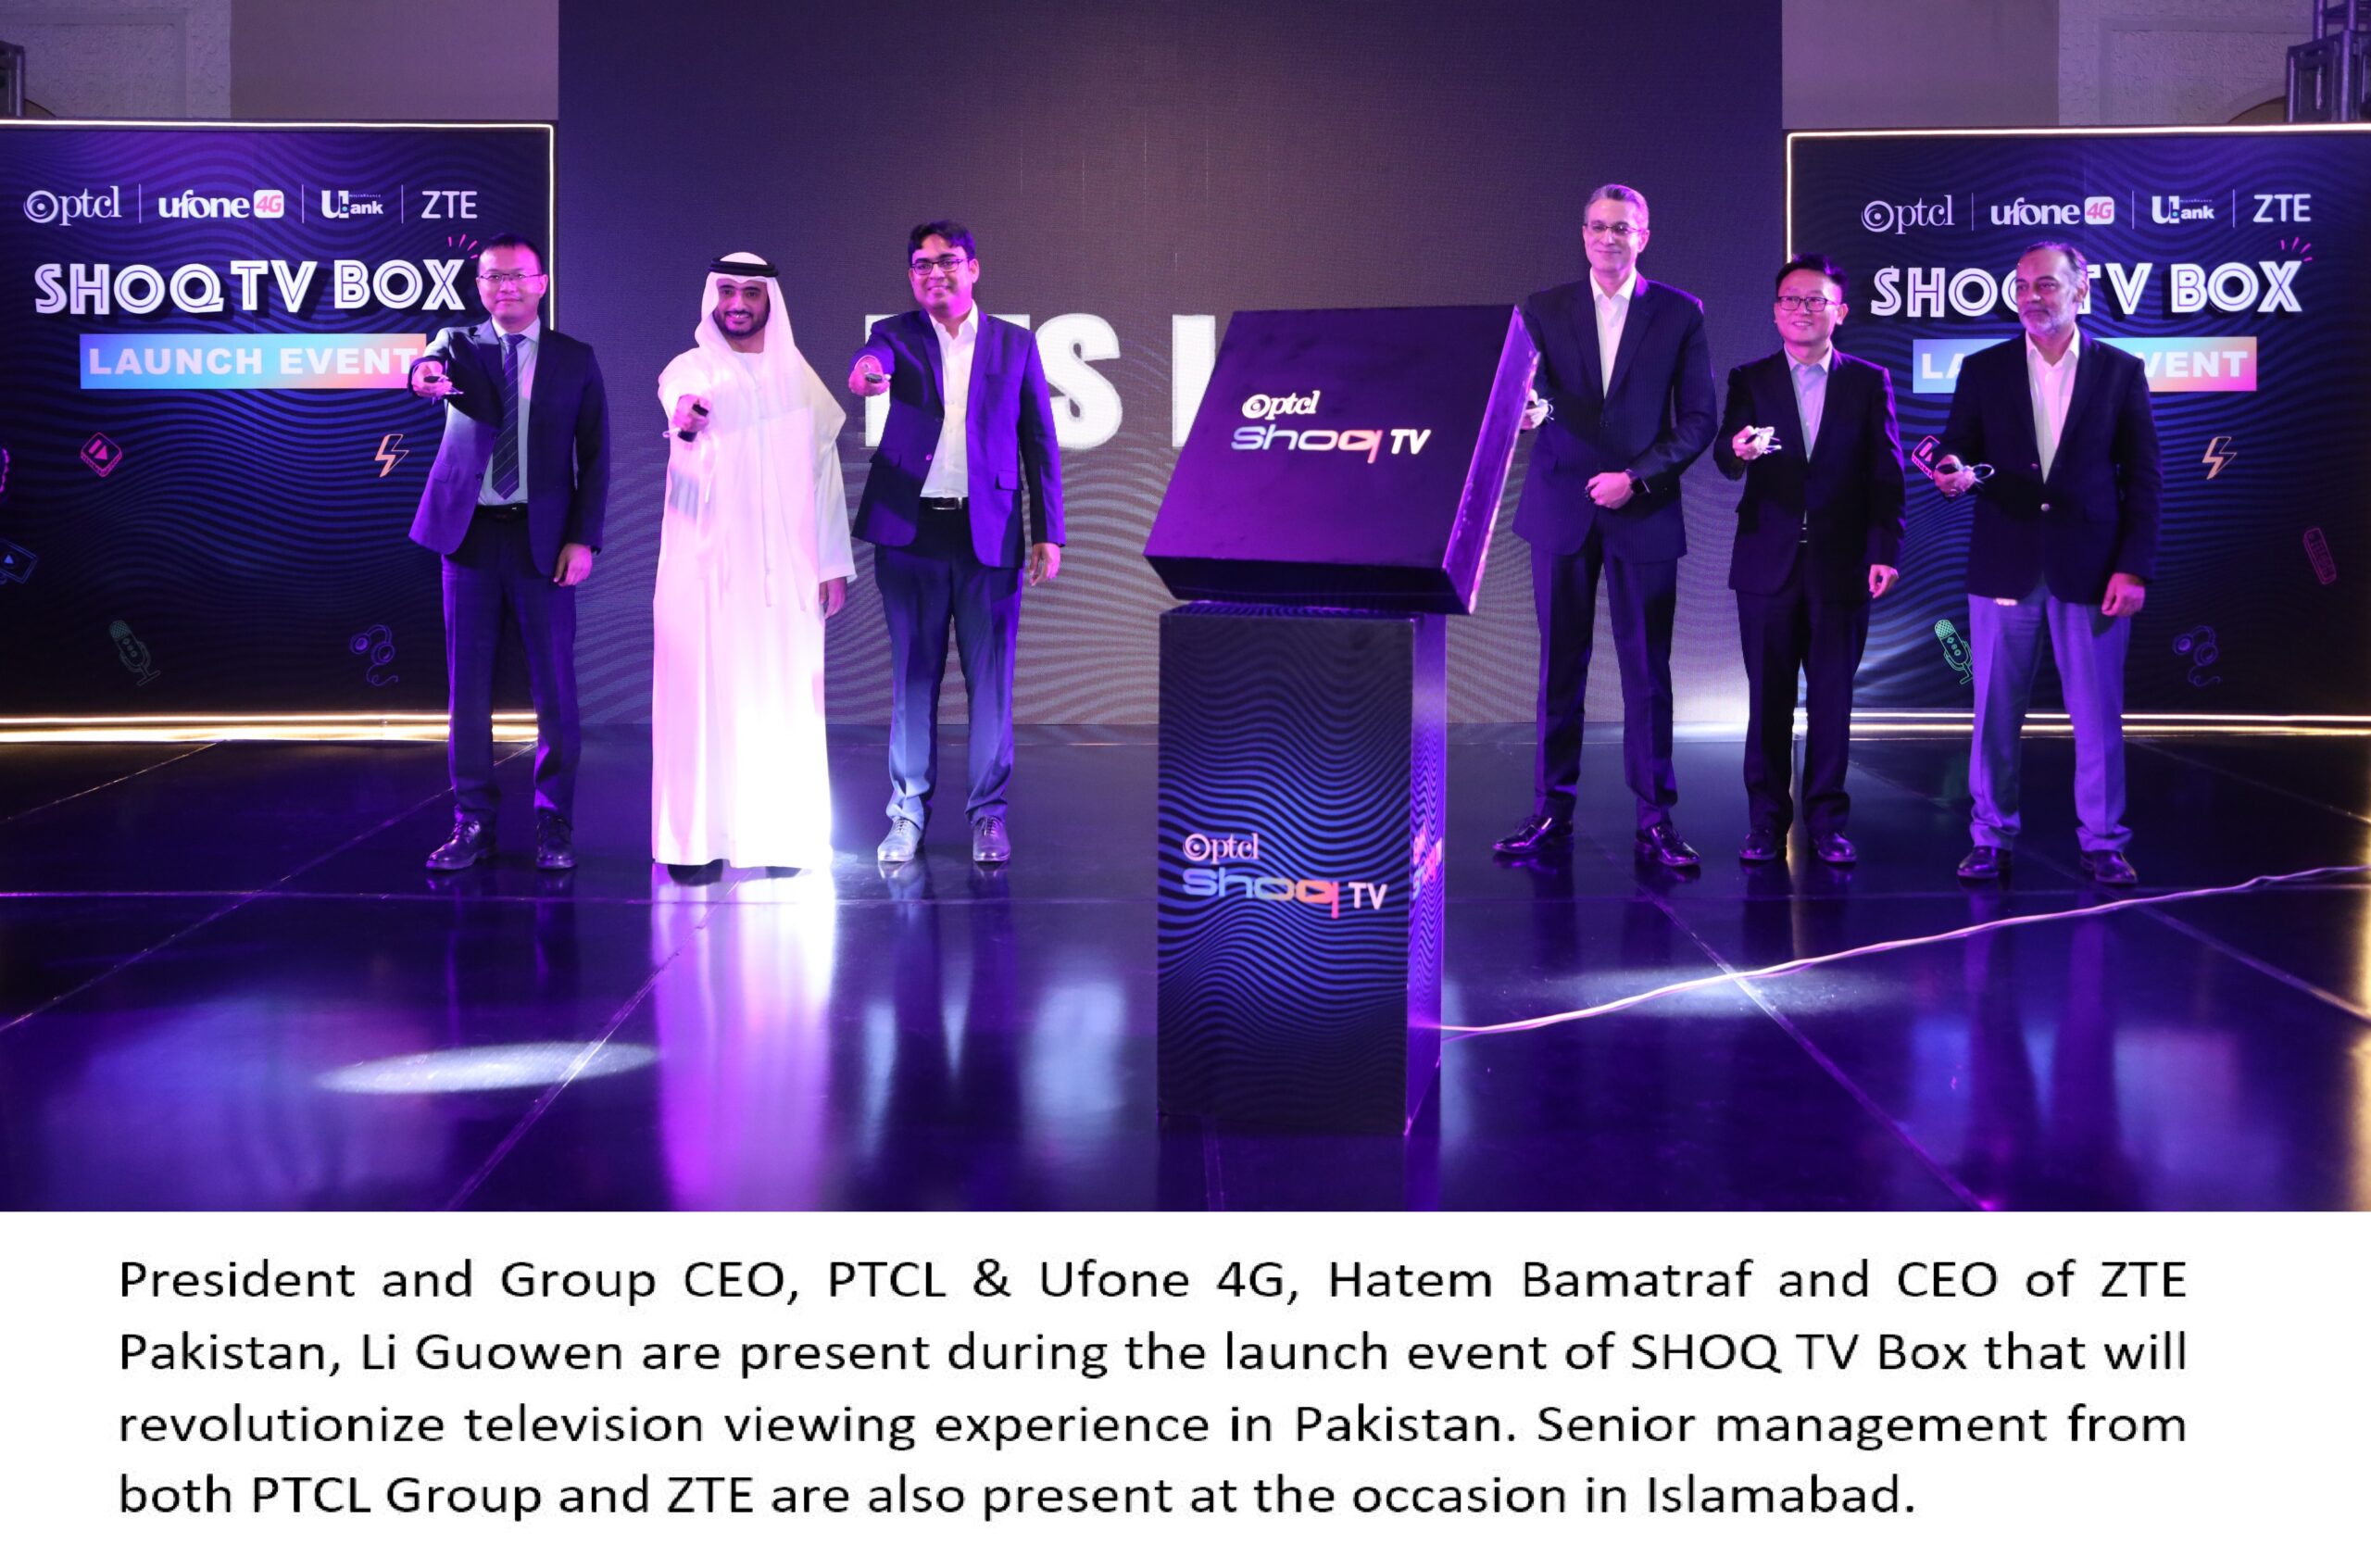 PTCL launches SHOQ TV Box to revolutionize television viewing experience in Pakistan